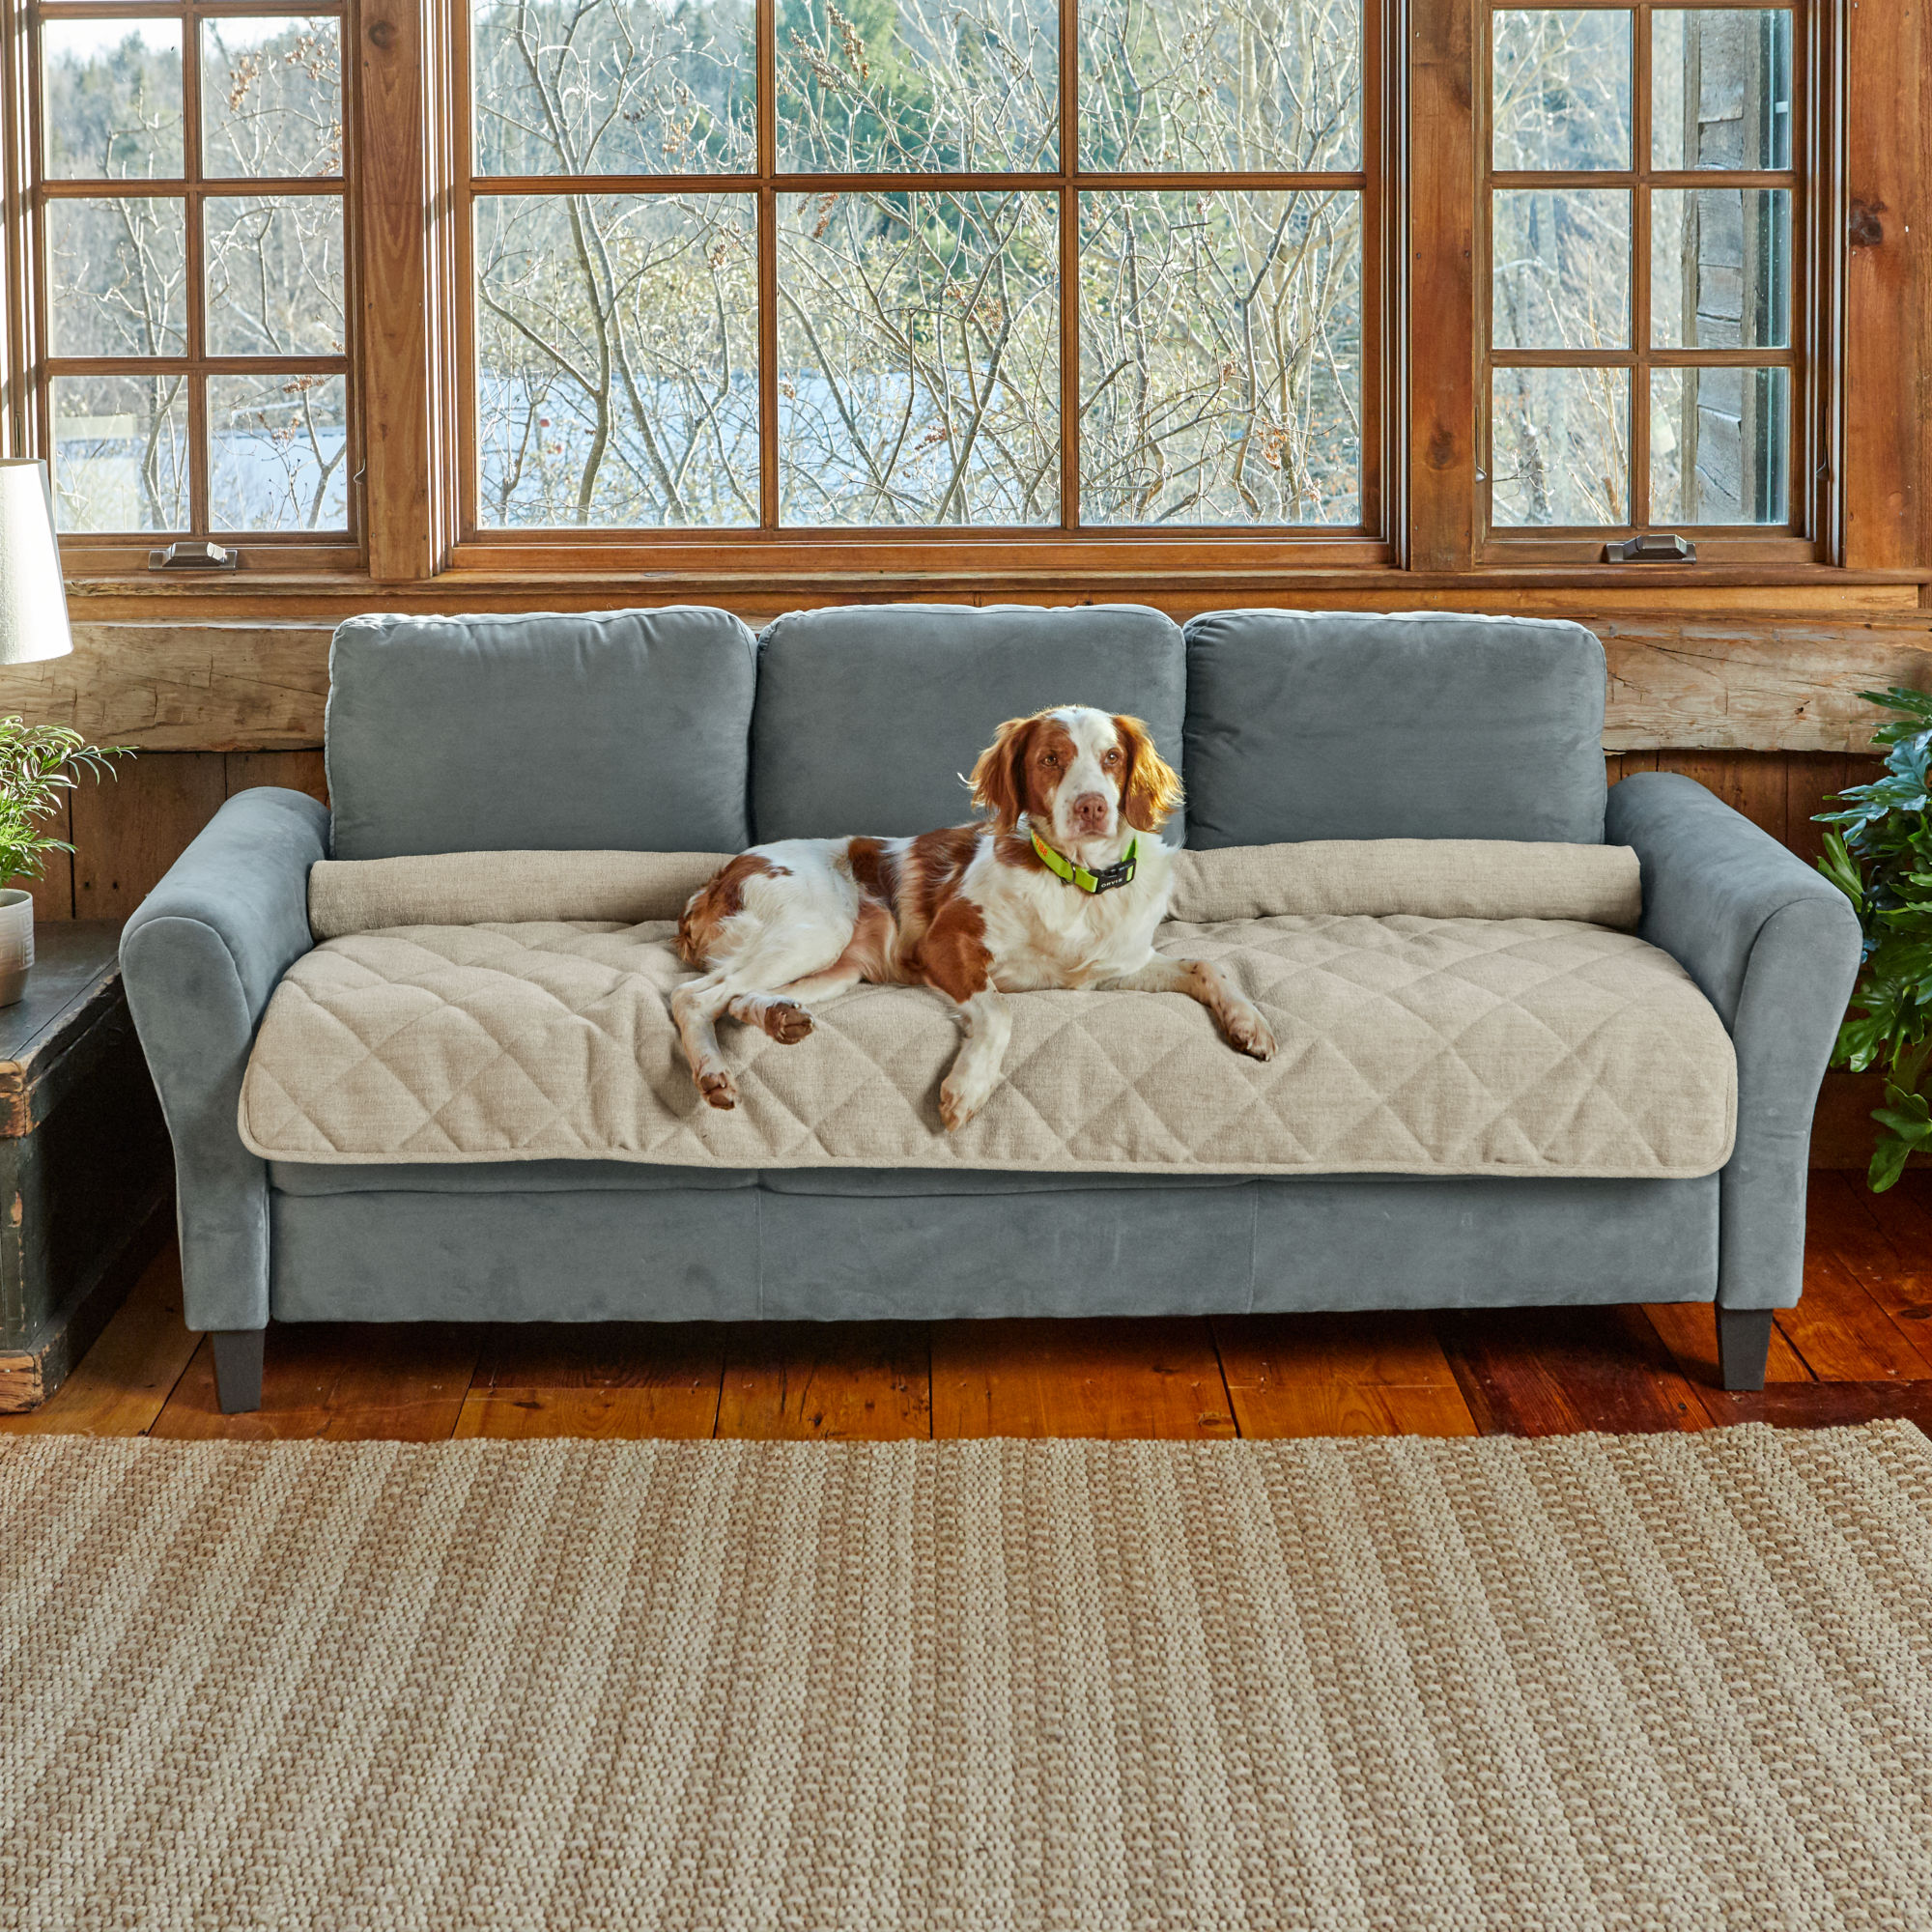 Granbest Stretch Sofa Slipcovers 3 Cushion Couch Covers Water-Repellent Pet Furniture Covers Dog Couch Protectors Beige, Loveseat-2 Pieces